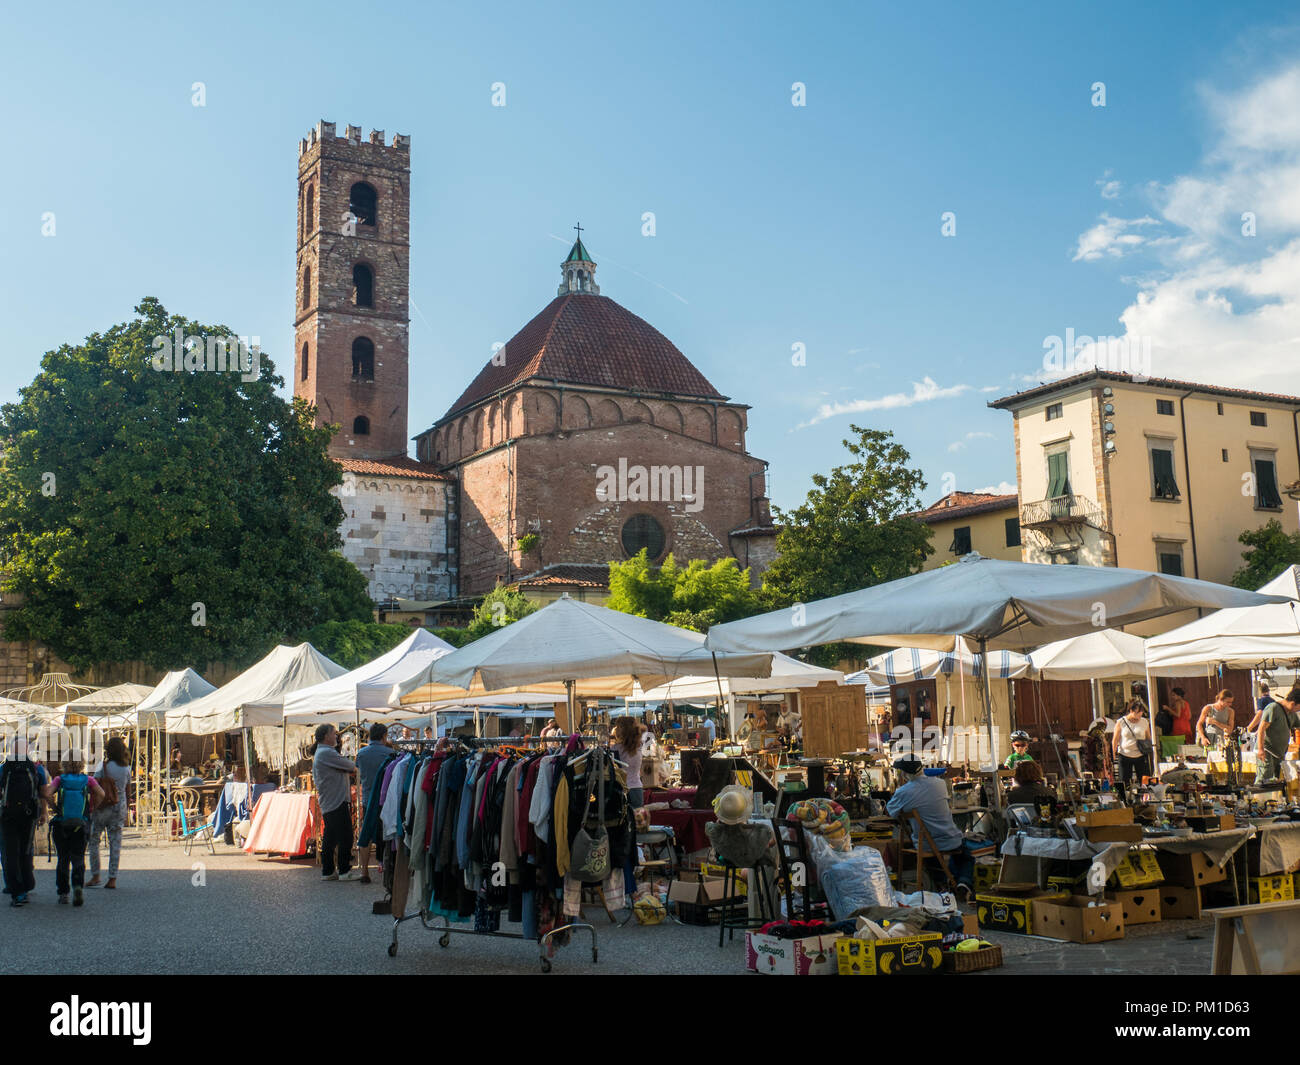 Piazza Antelminelli with the Church of Saint John (Giovanni) & Reparata, on a market day in the walled city of Lucca, Tuscany, Italy Stock Photo